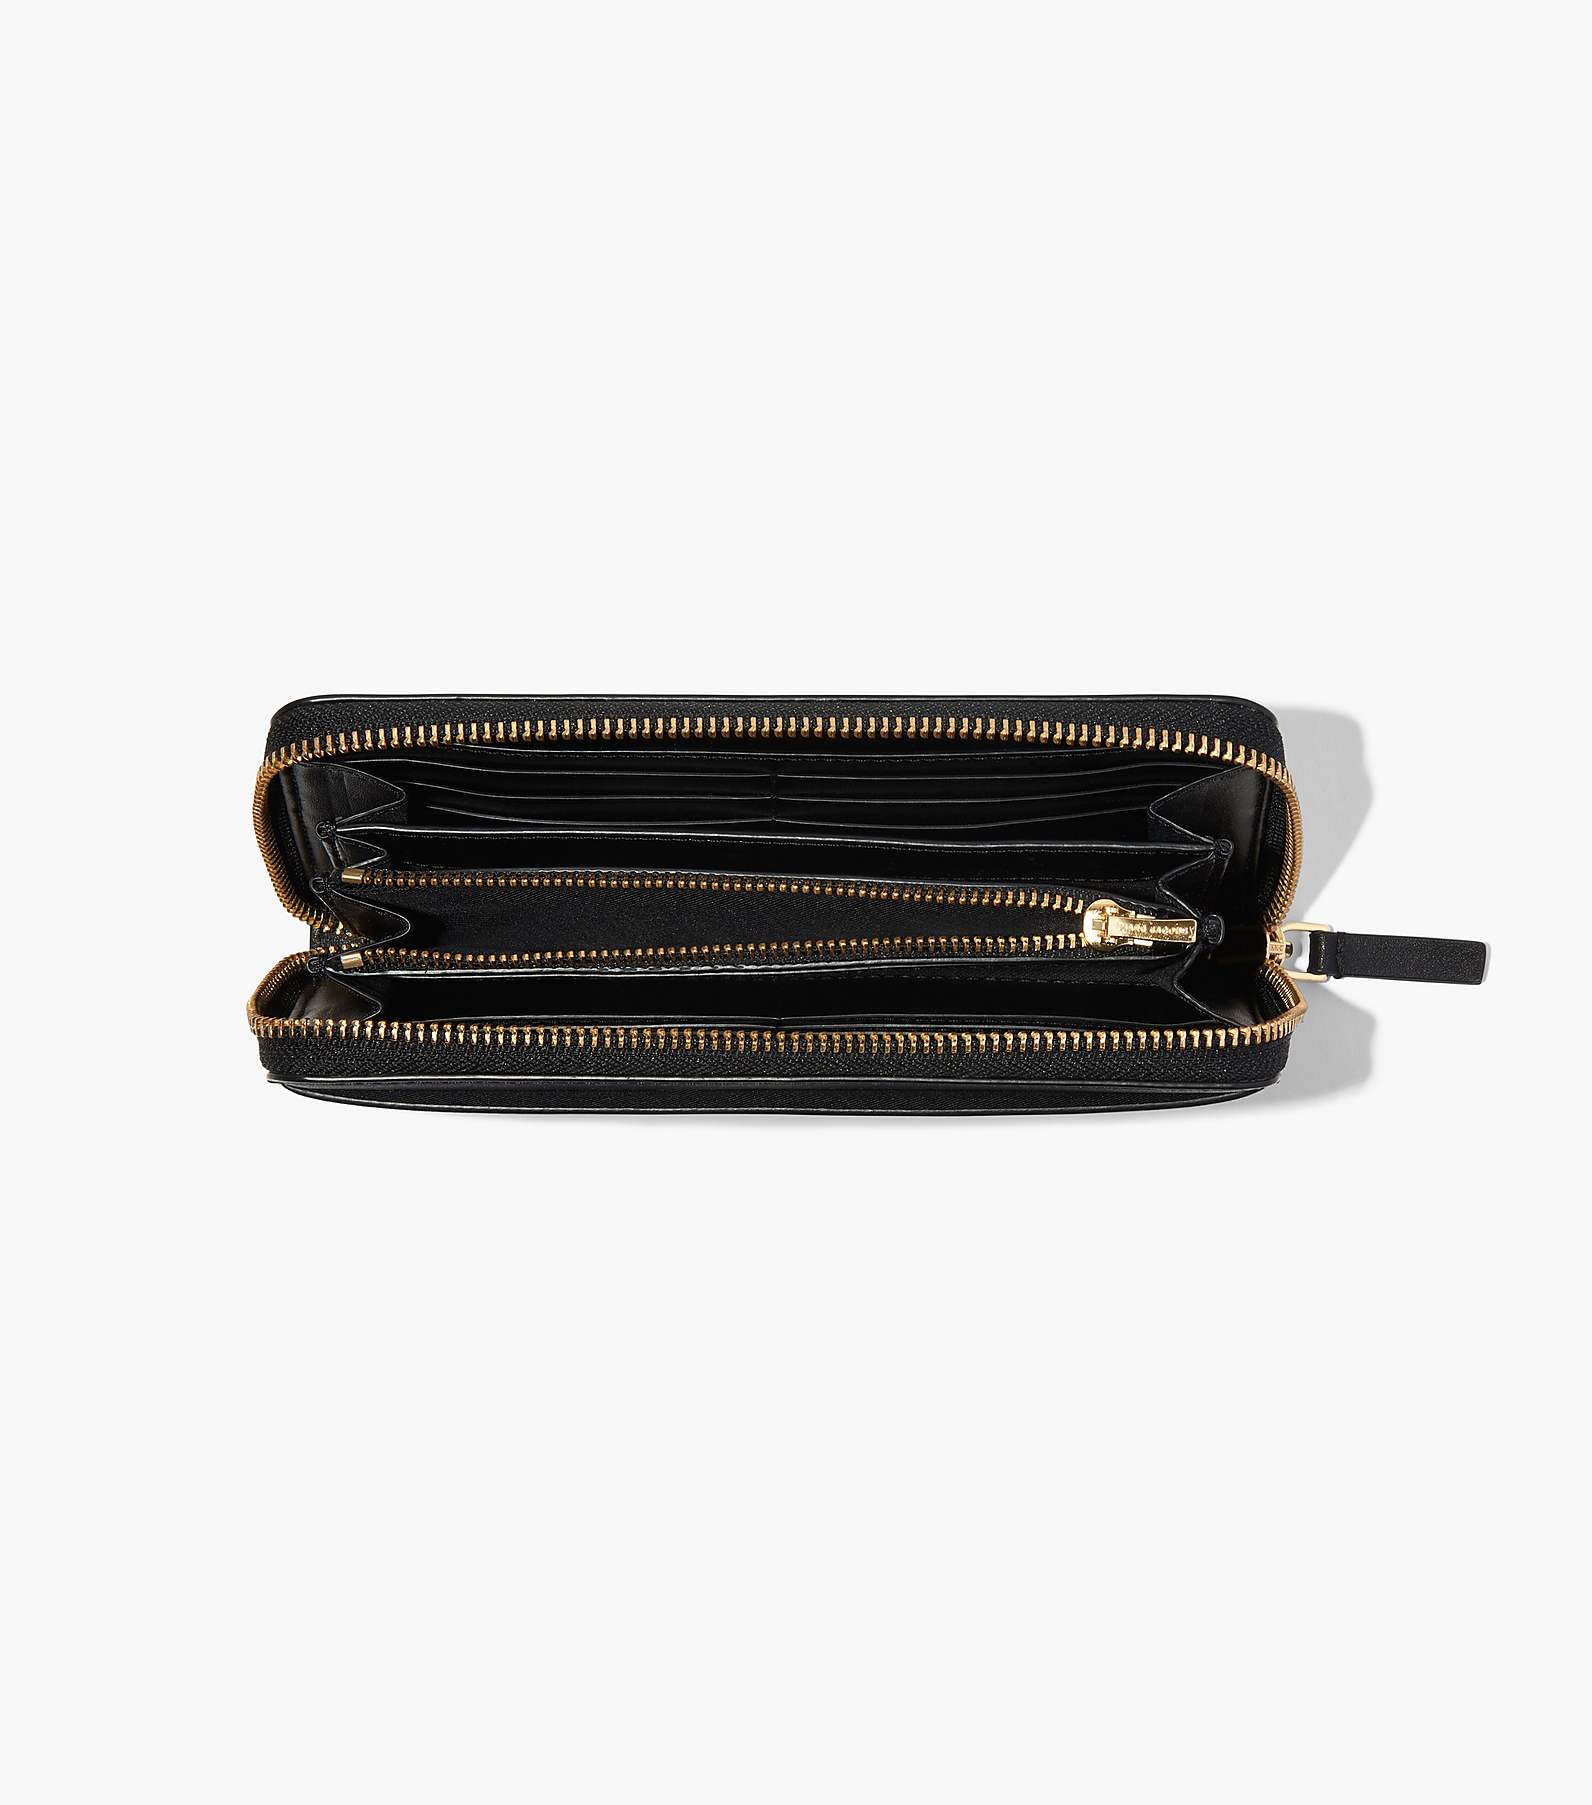 THE LEATHER J MARC CONTINENTAL WALLET